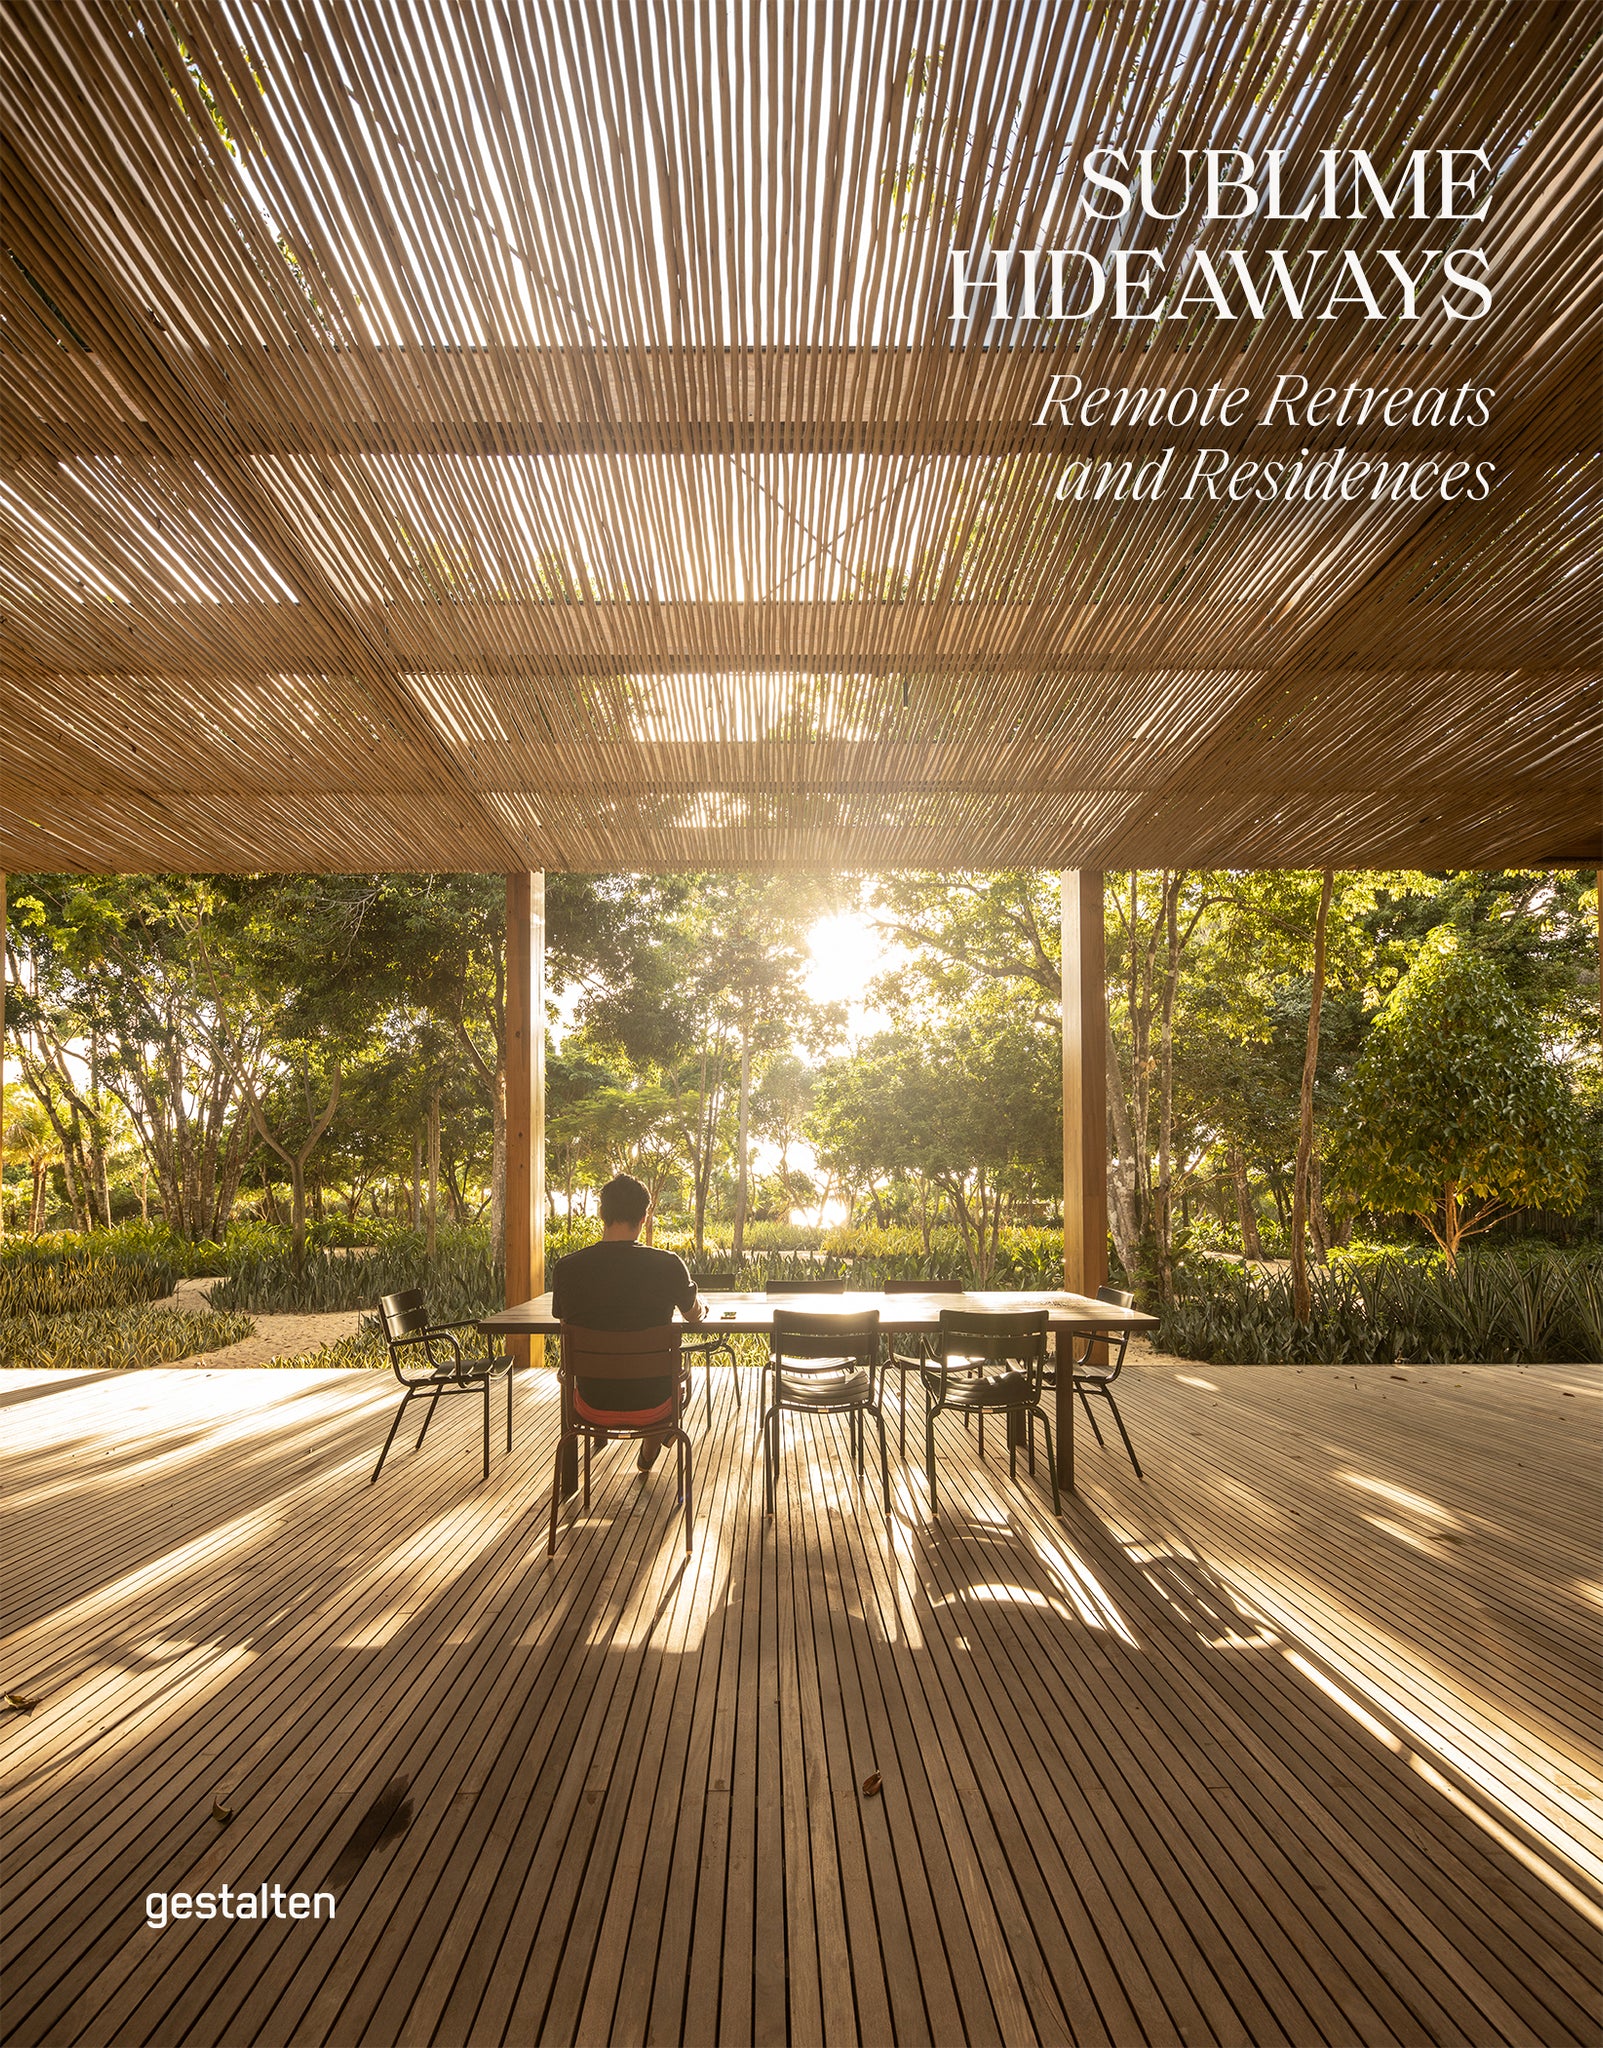 Sublime Hideaways: Remote Retreats and Residences cover